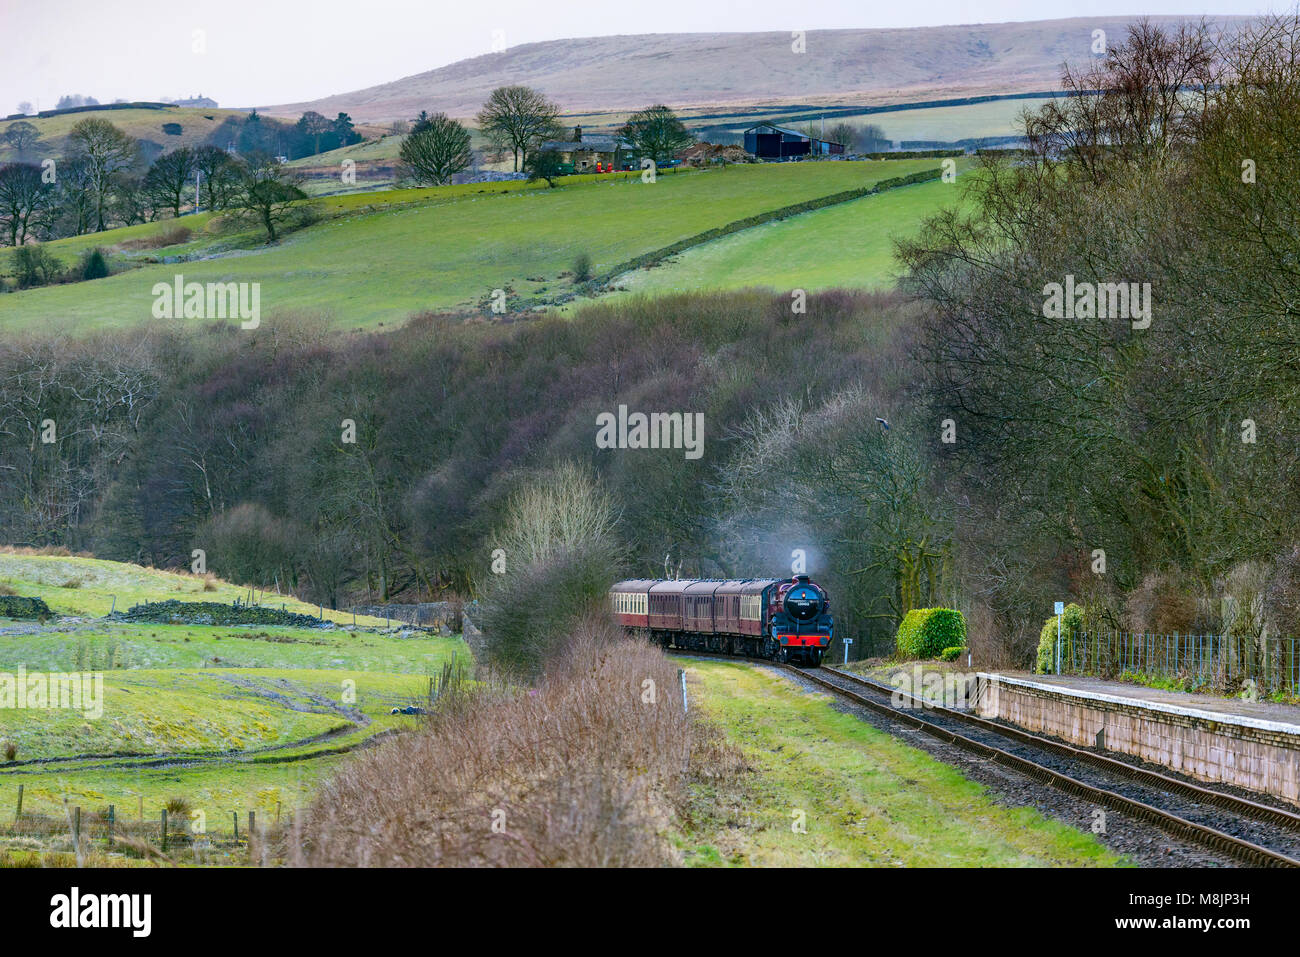 The Mogul steam locomotive The Crab pictured on the East Lancashire Railway At Irwell Vale halt. Stock Photo